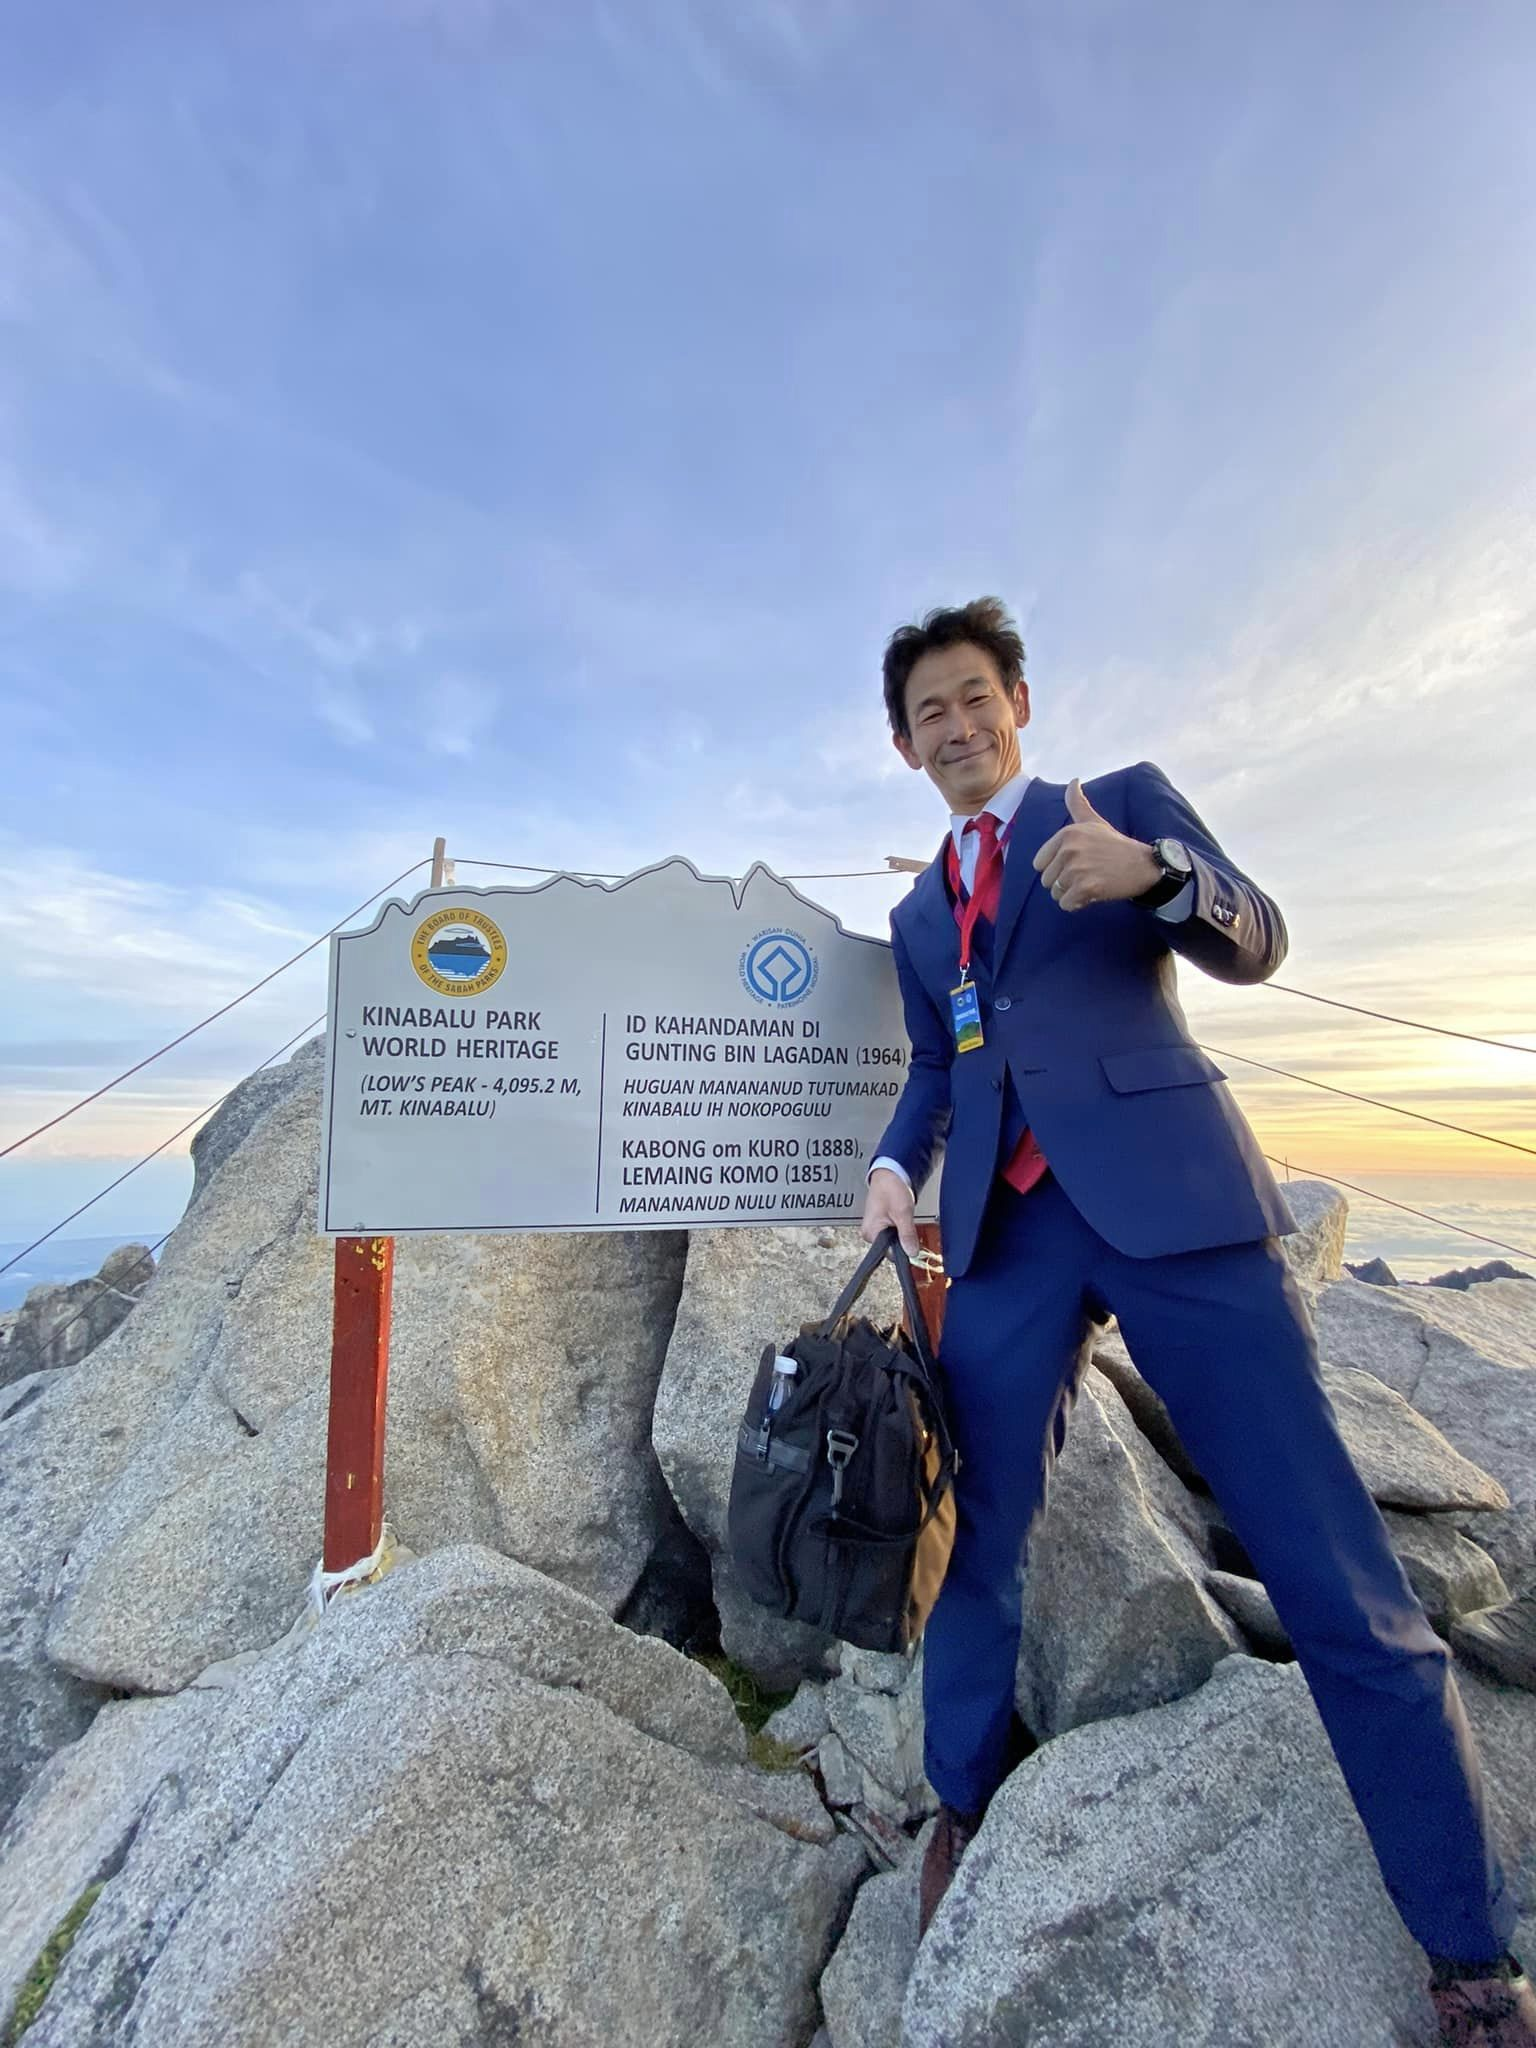 Japanese man climbs mt kinabalu in a suit to attend 'business meeting'